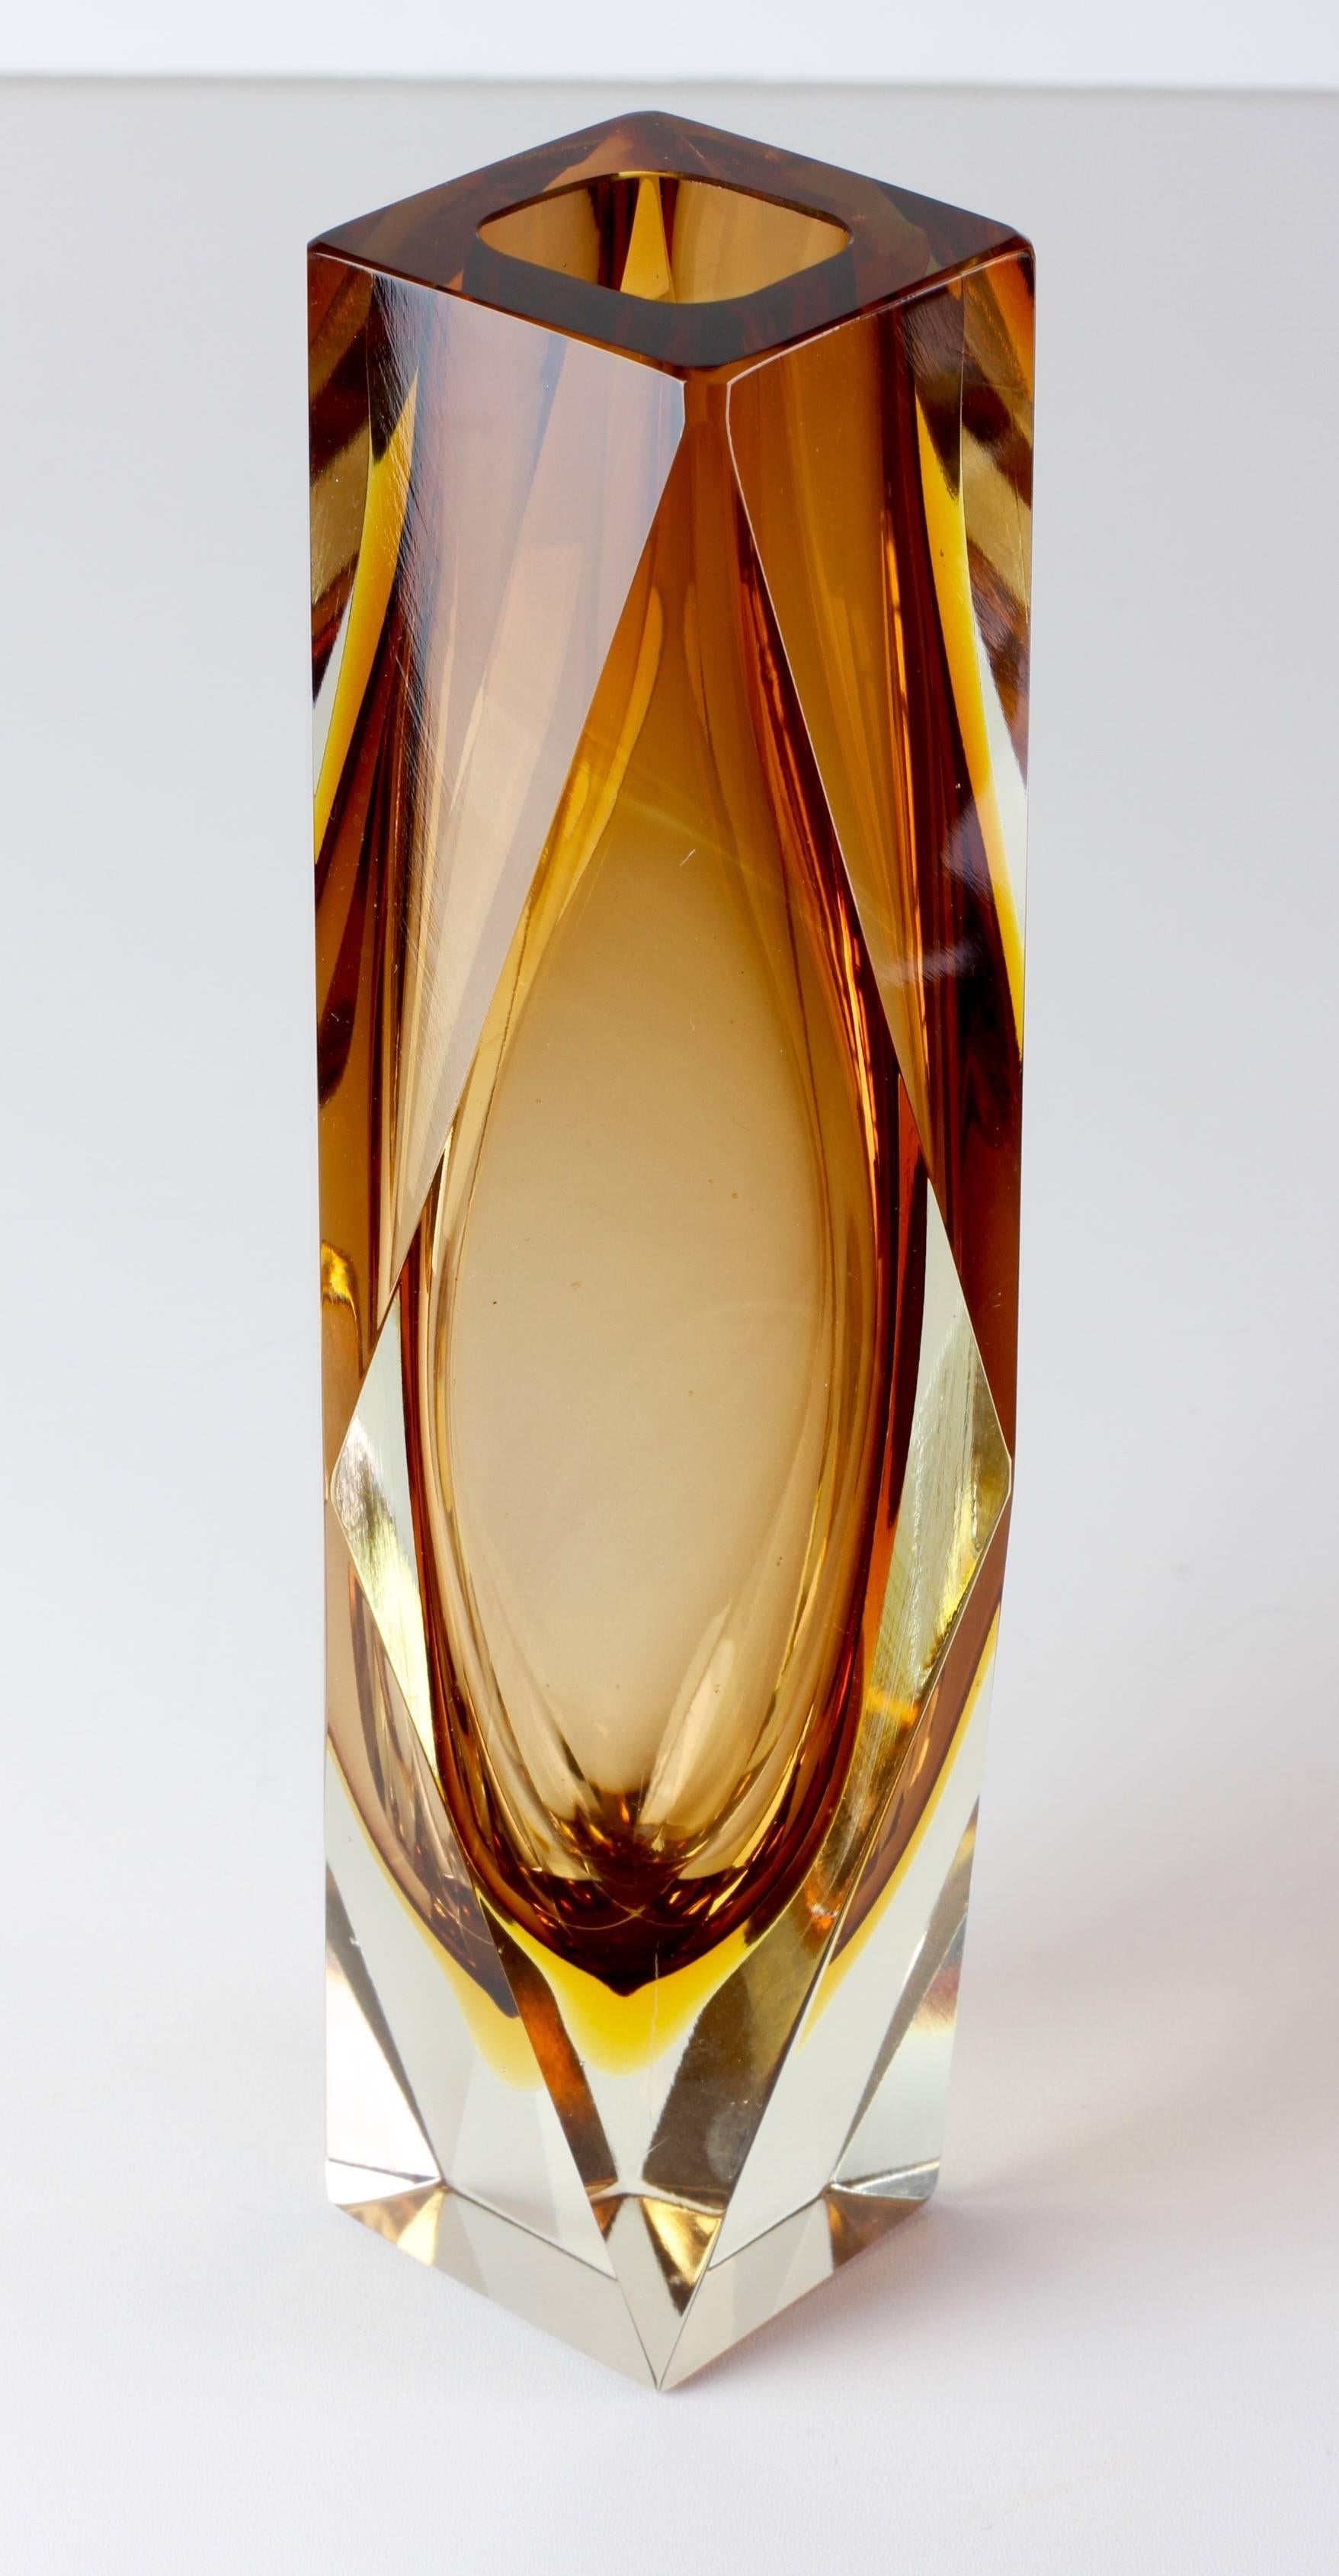 This beautiful Italian Mid-Century Modern Murano glass vase in the Style of Mandruzzato. Exceptional in every way, commanding you to admire its stunning design and masterful production. Faceted on four sides and utilizing the Sommerso technique over